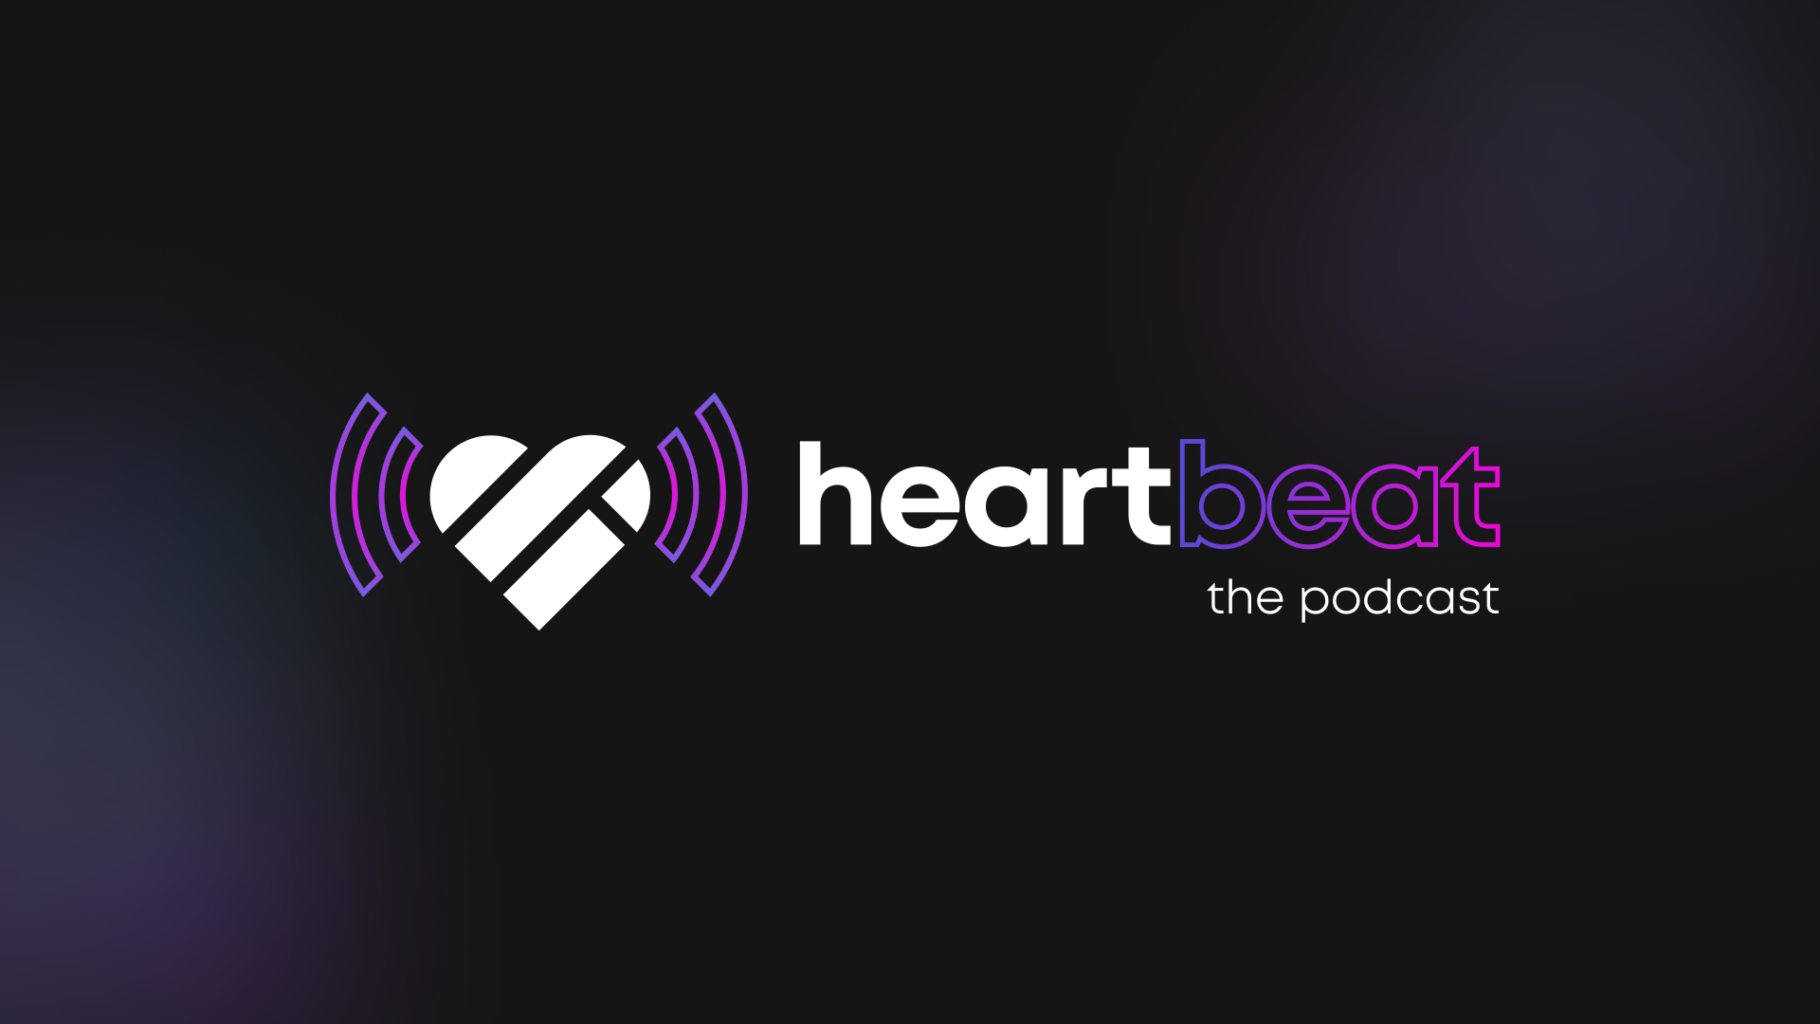 Introducing the Heartbeat Podcast by Digital Impulse!